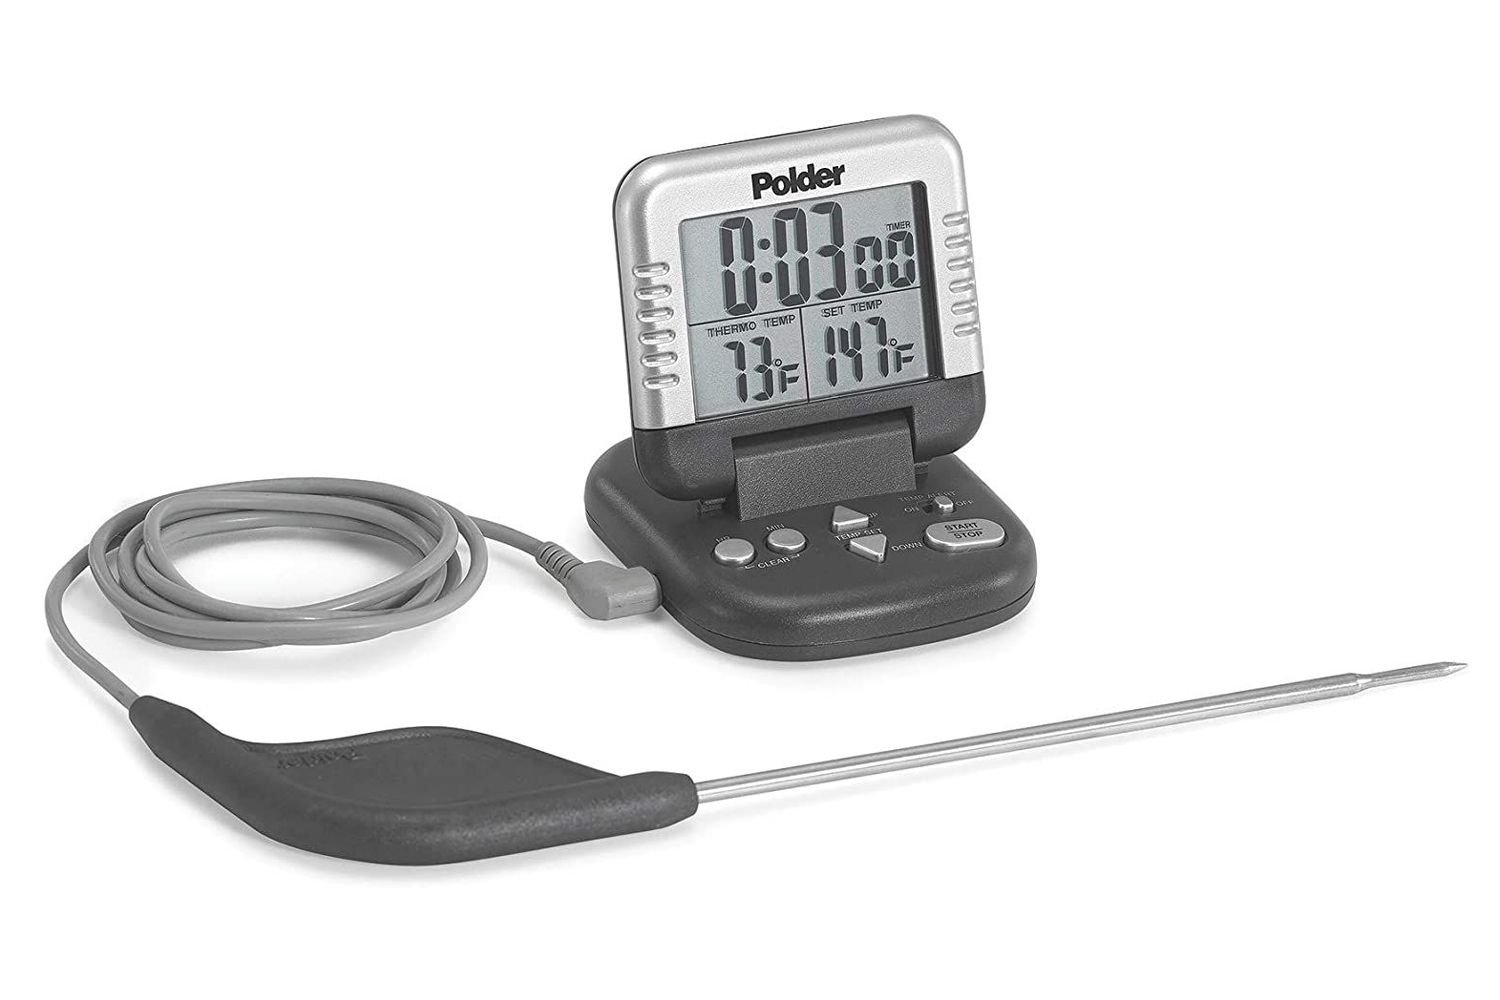 Polder Digital In-Oven Thermometer